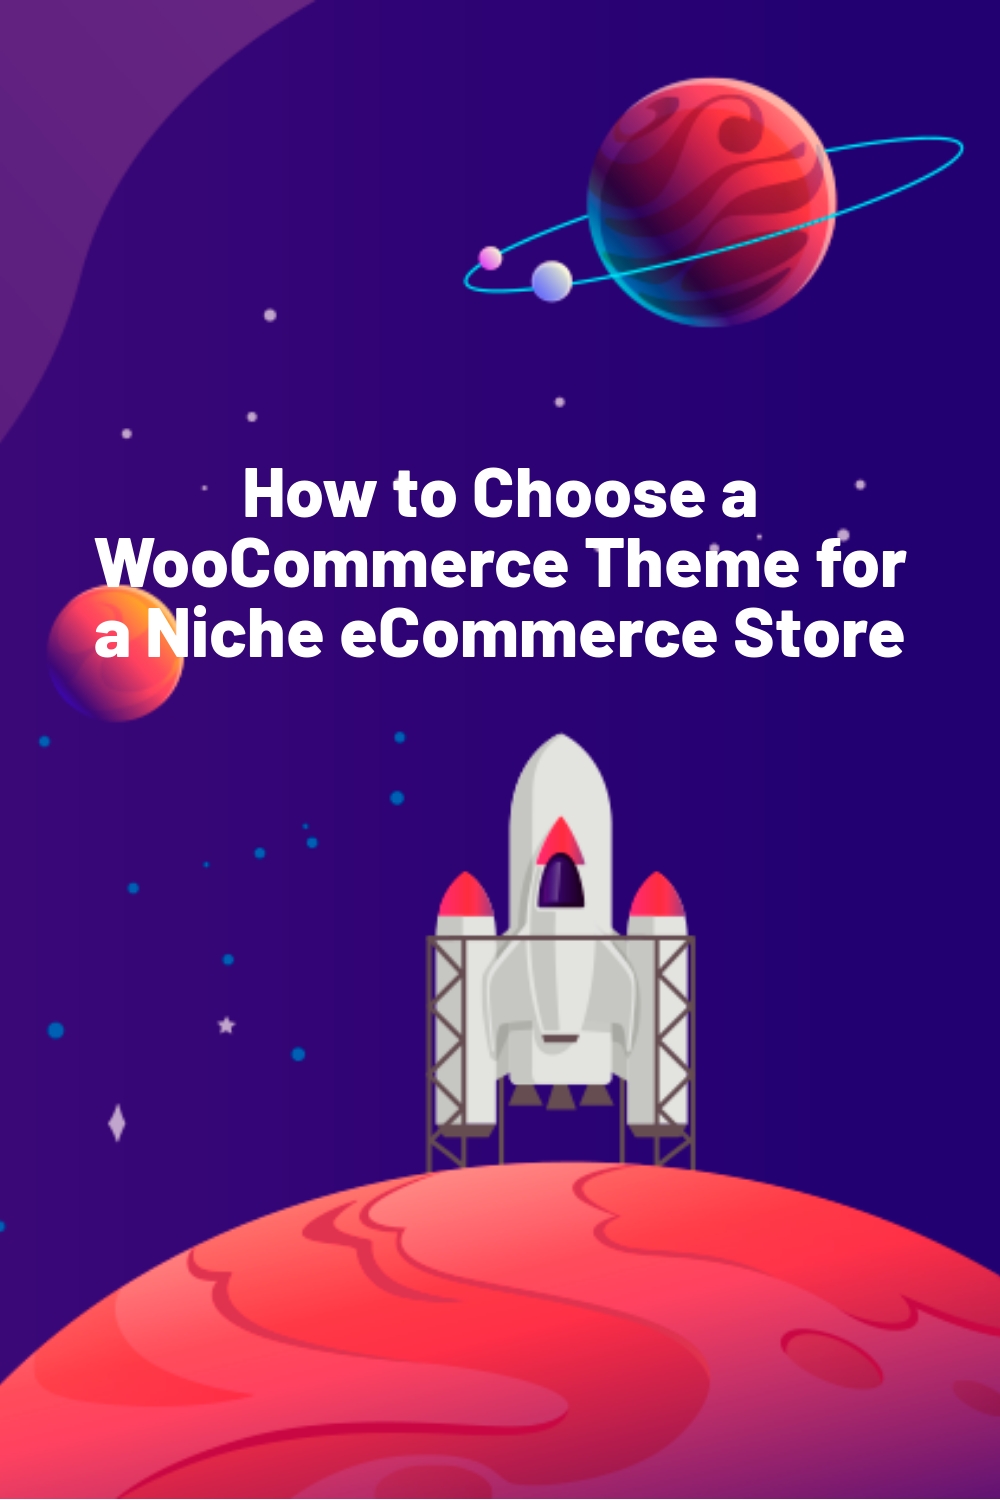 How to Choose a WooCommerce Theme for a Niche eCommerce Store